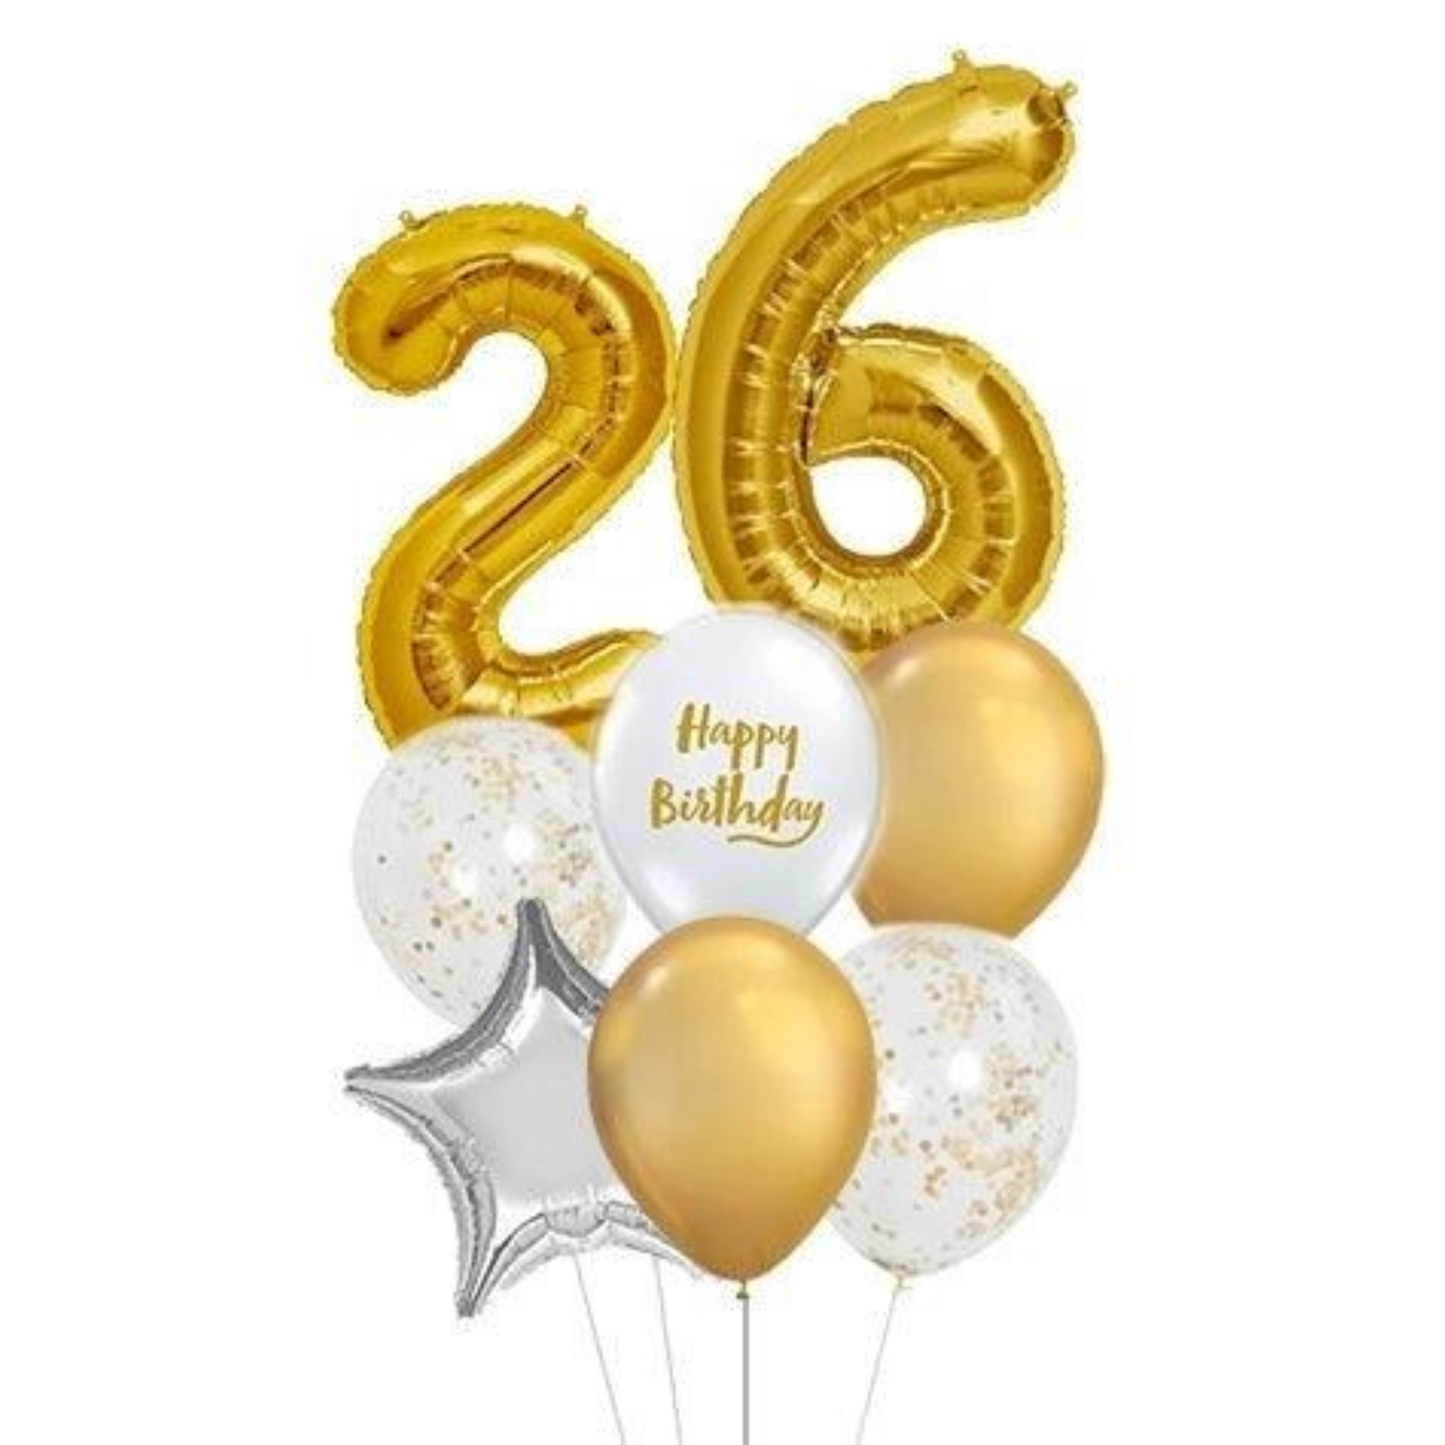 Vancouver Helium filled pick an age foil number and latex balloon delivery 